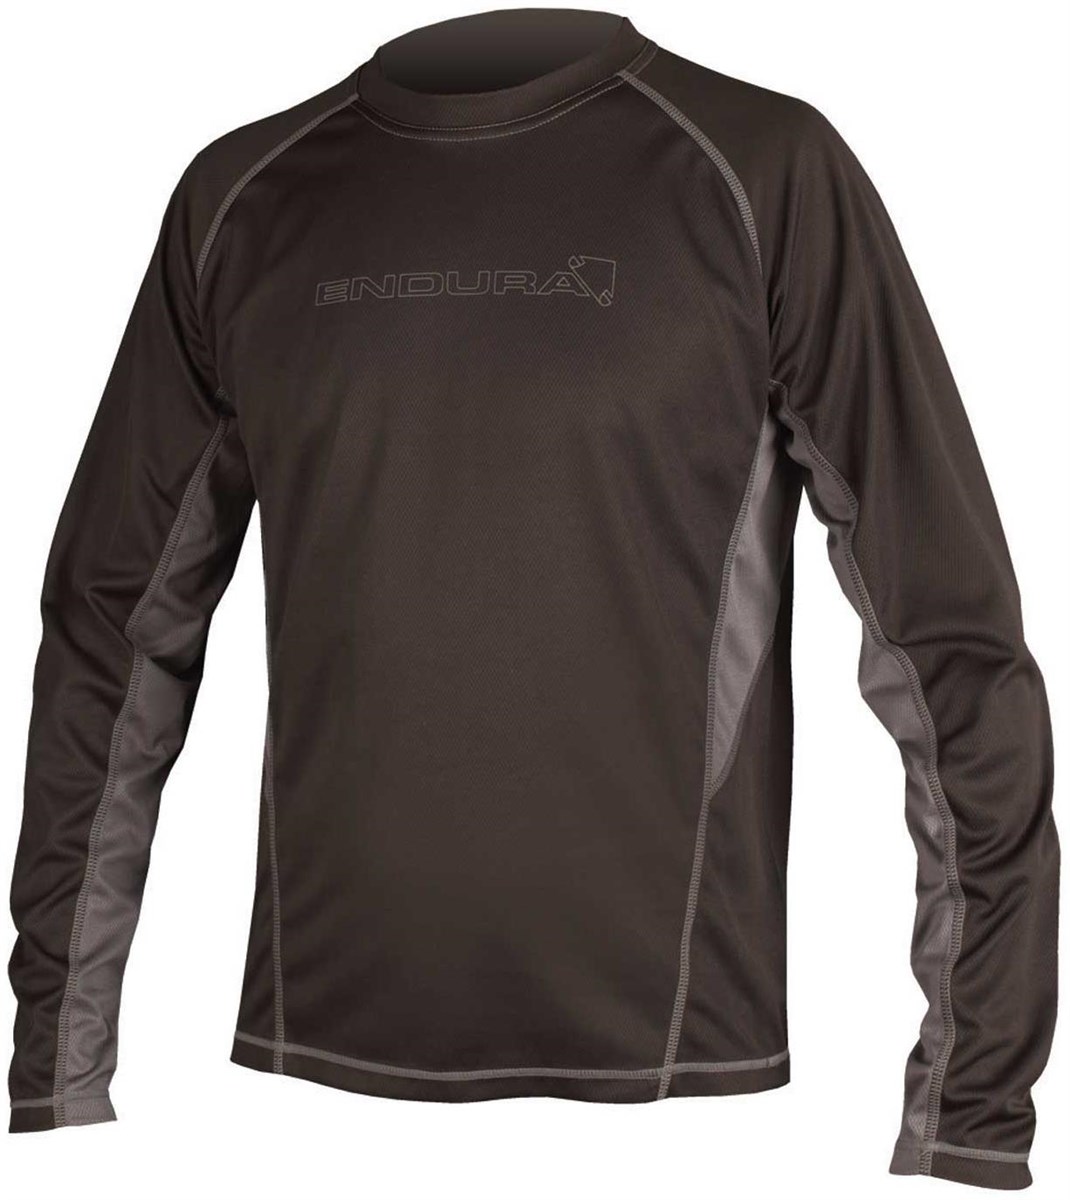 Endura Cairn T Long Sleeve Cycling Base Layer product image